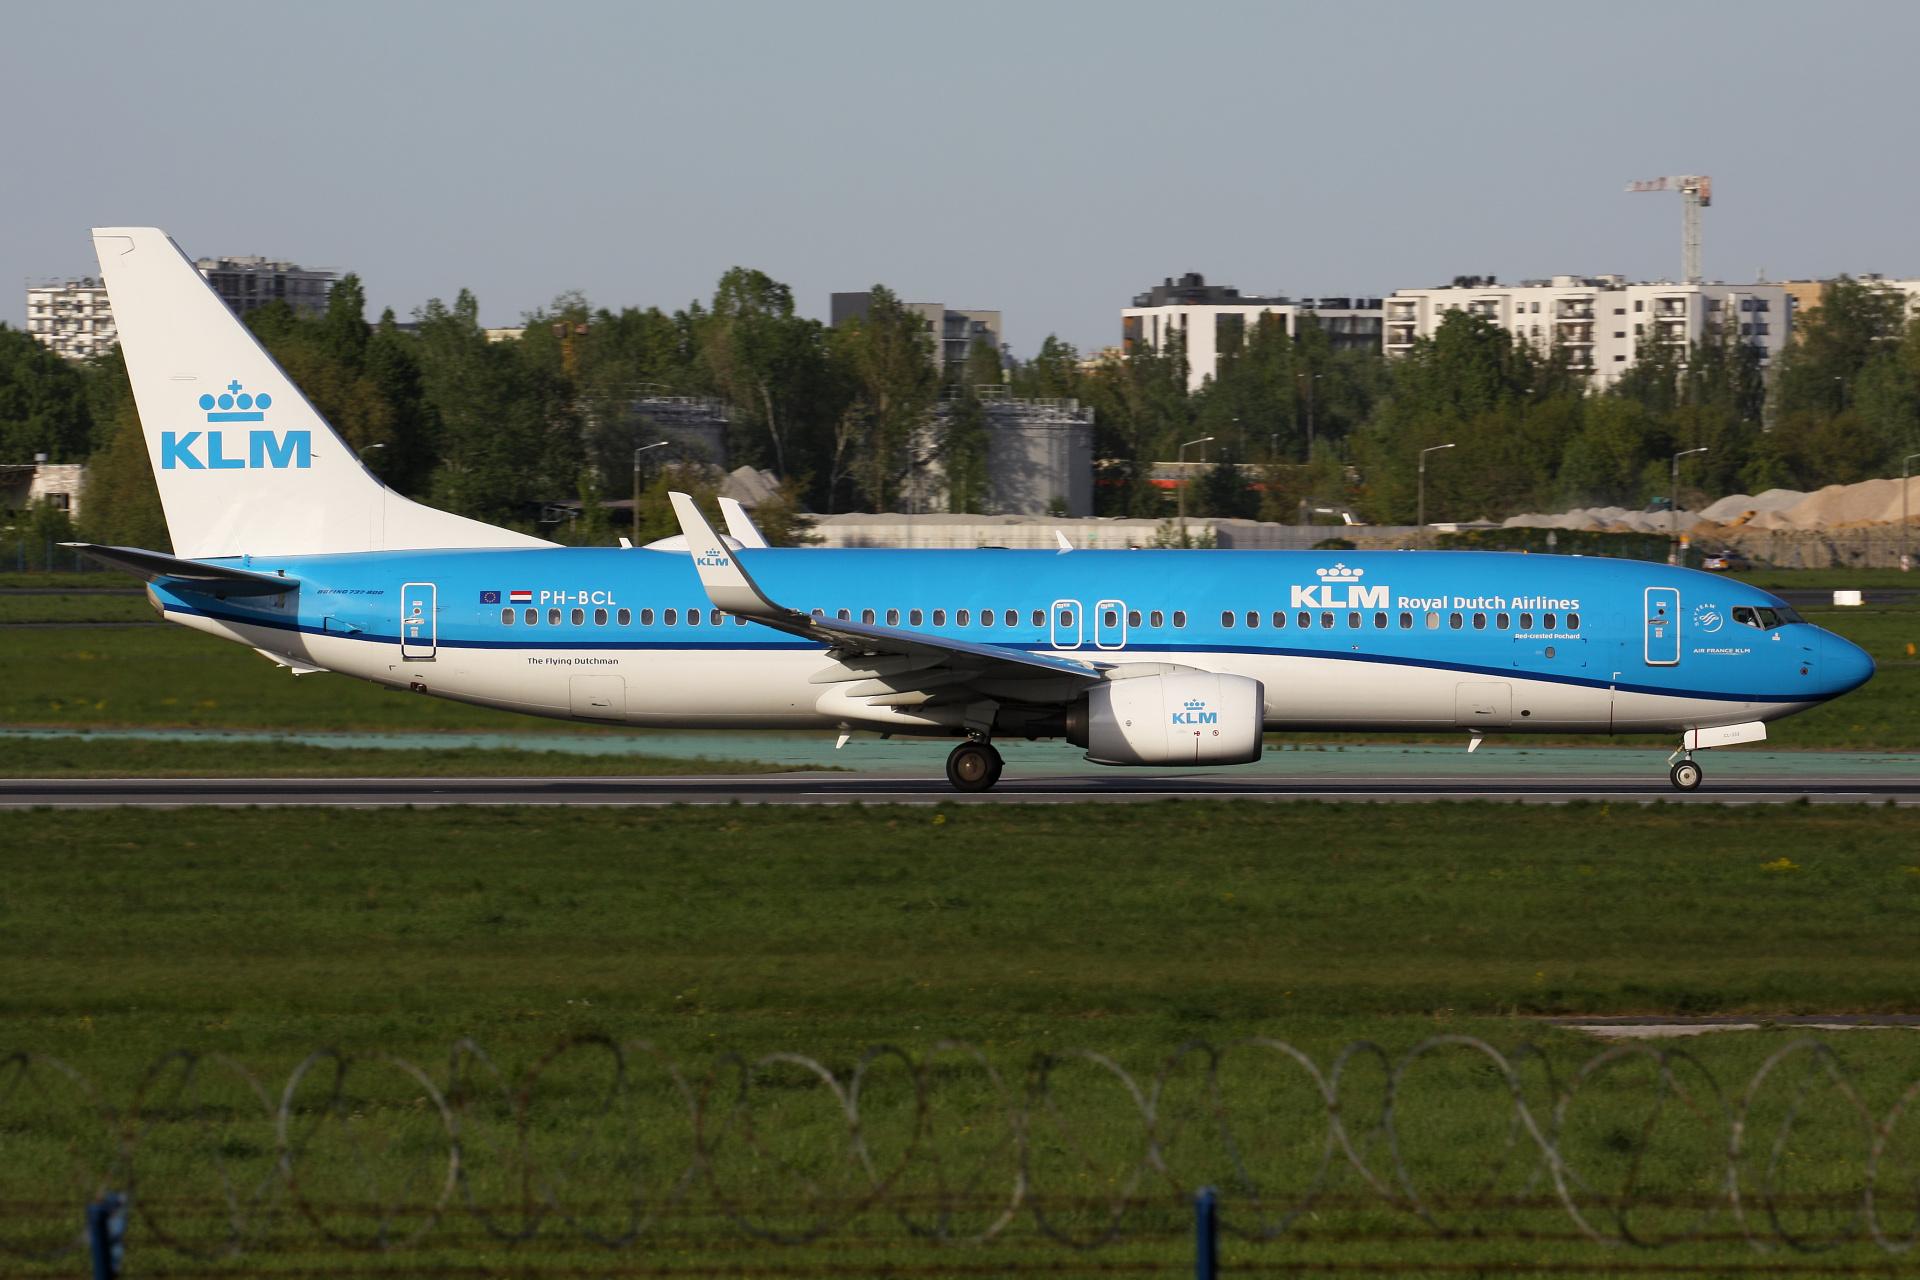 PH-BCL (Aircraft » EPWA Spotting » Boeing 737-800 » KLM Royal Dutch Airlines)